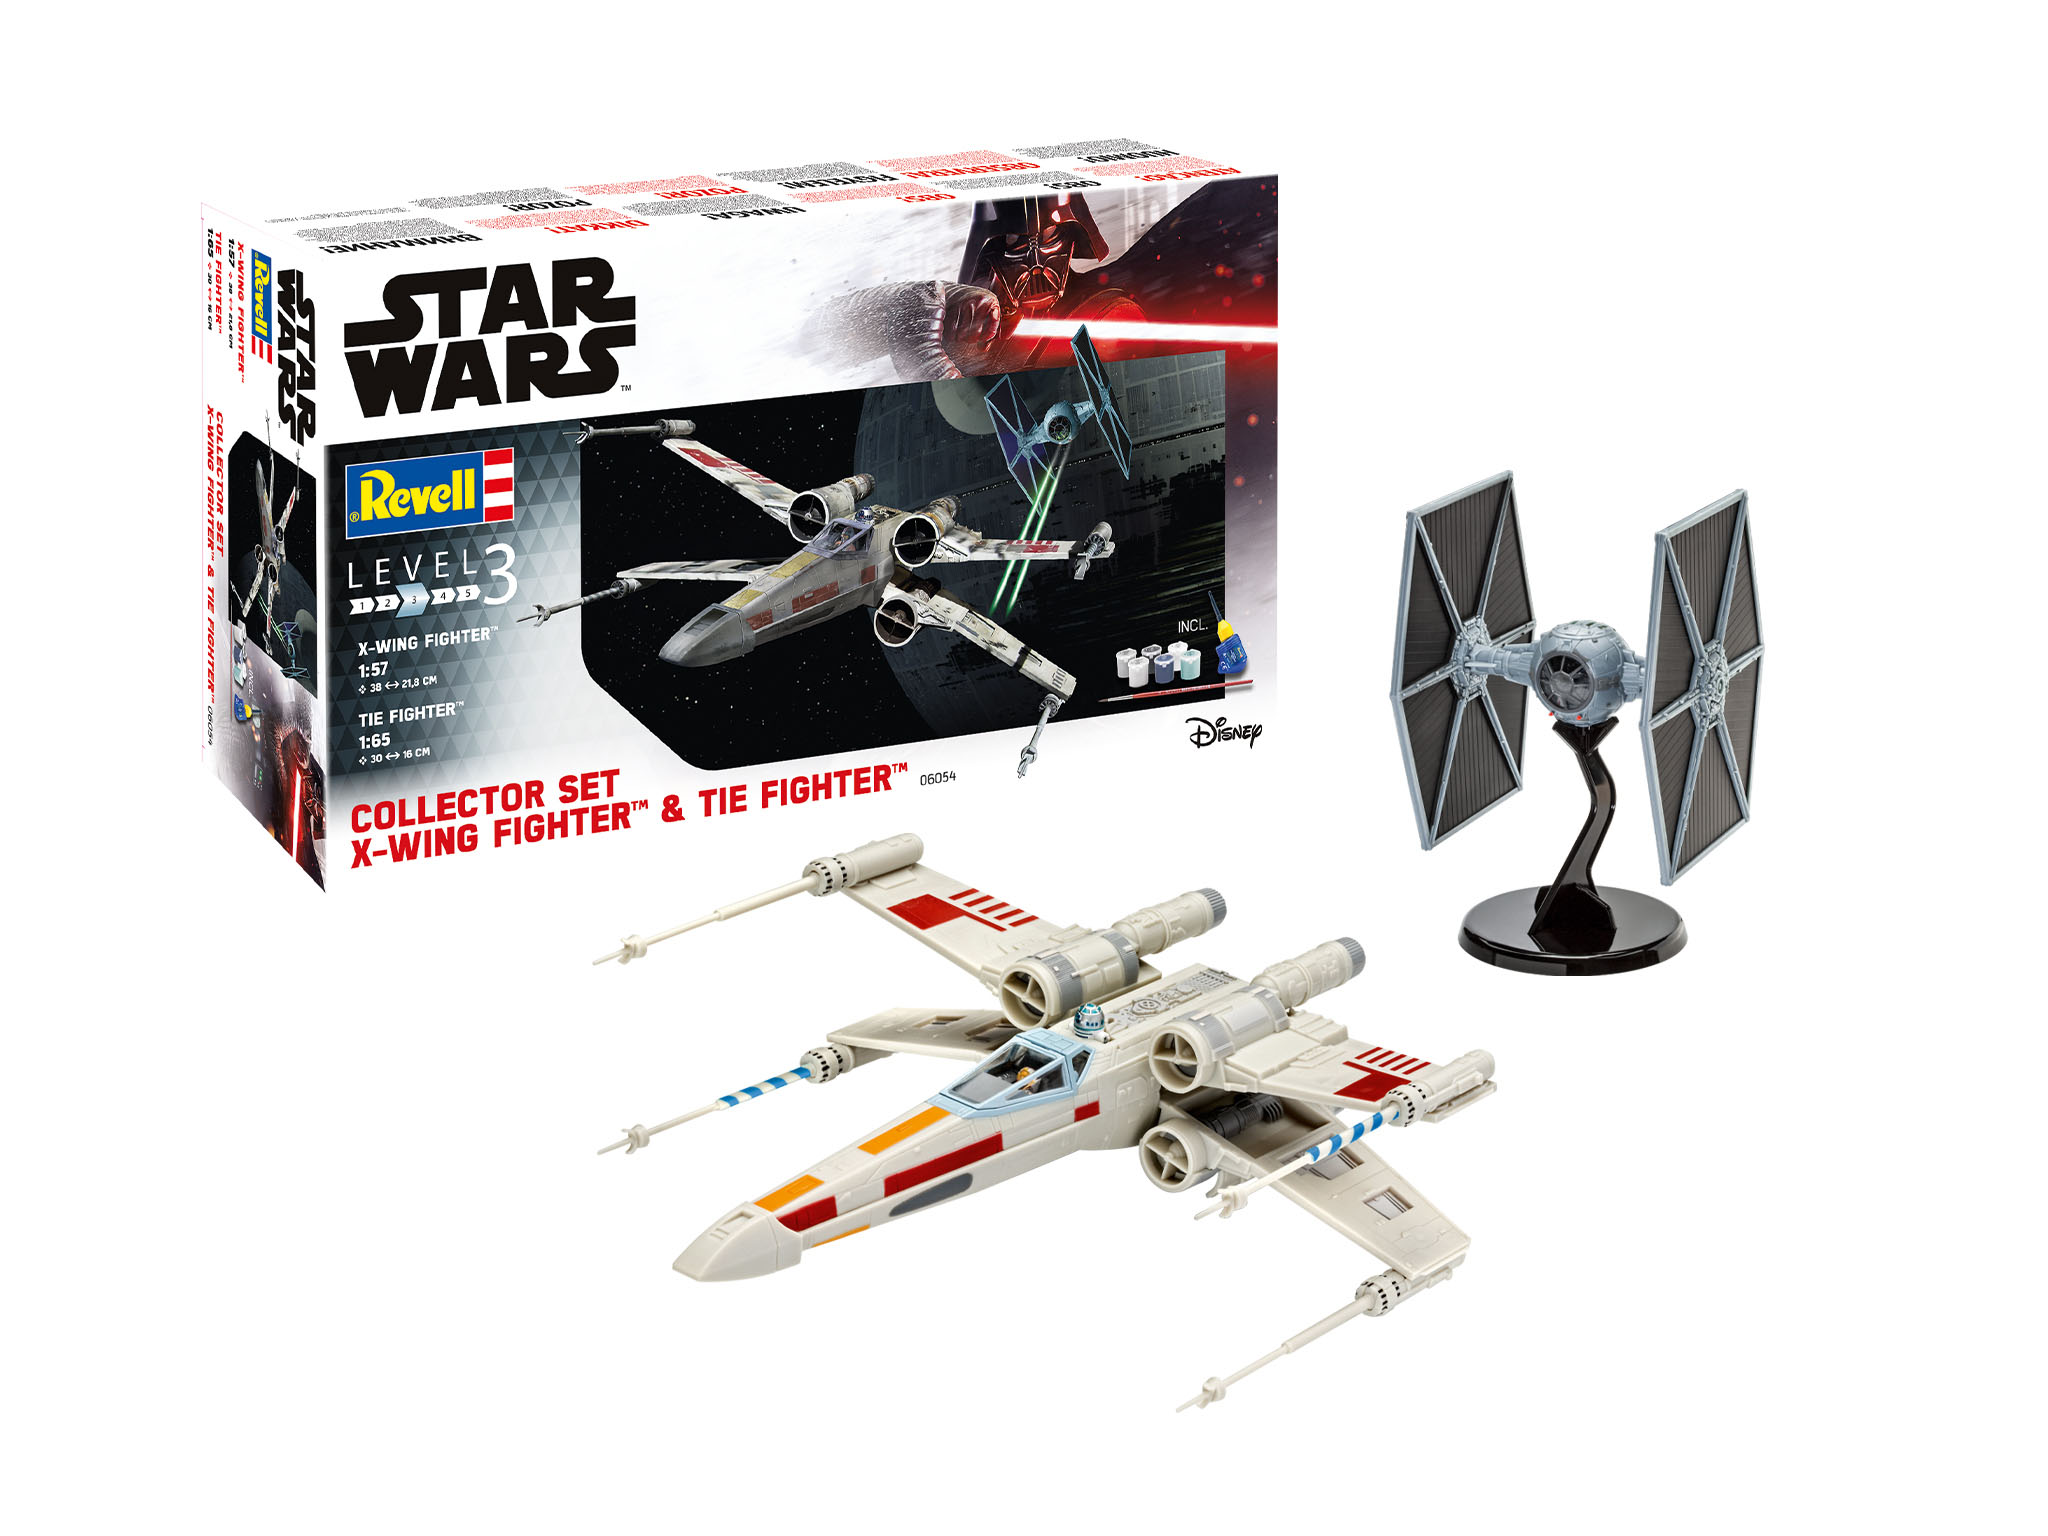 Collector Set X-Wing Fighter